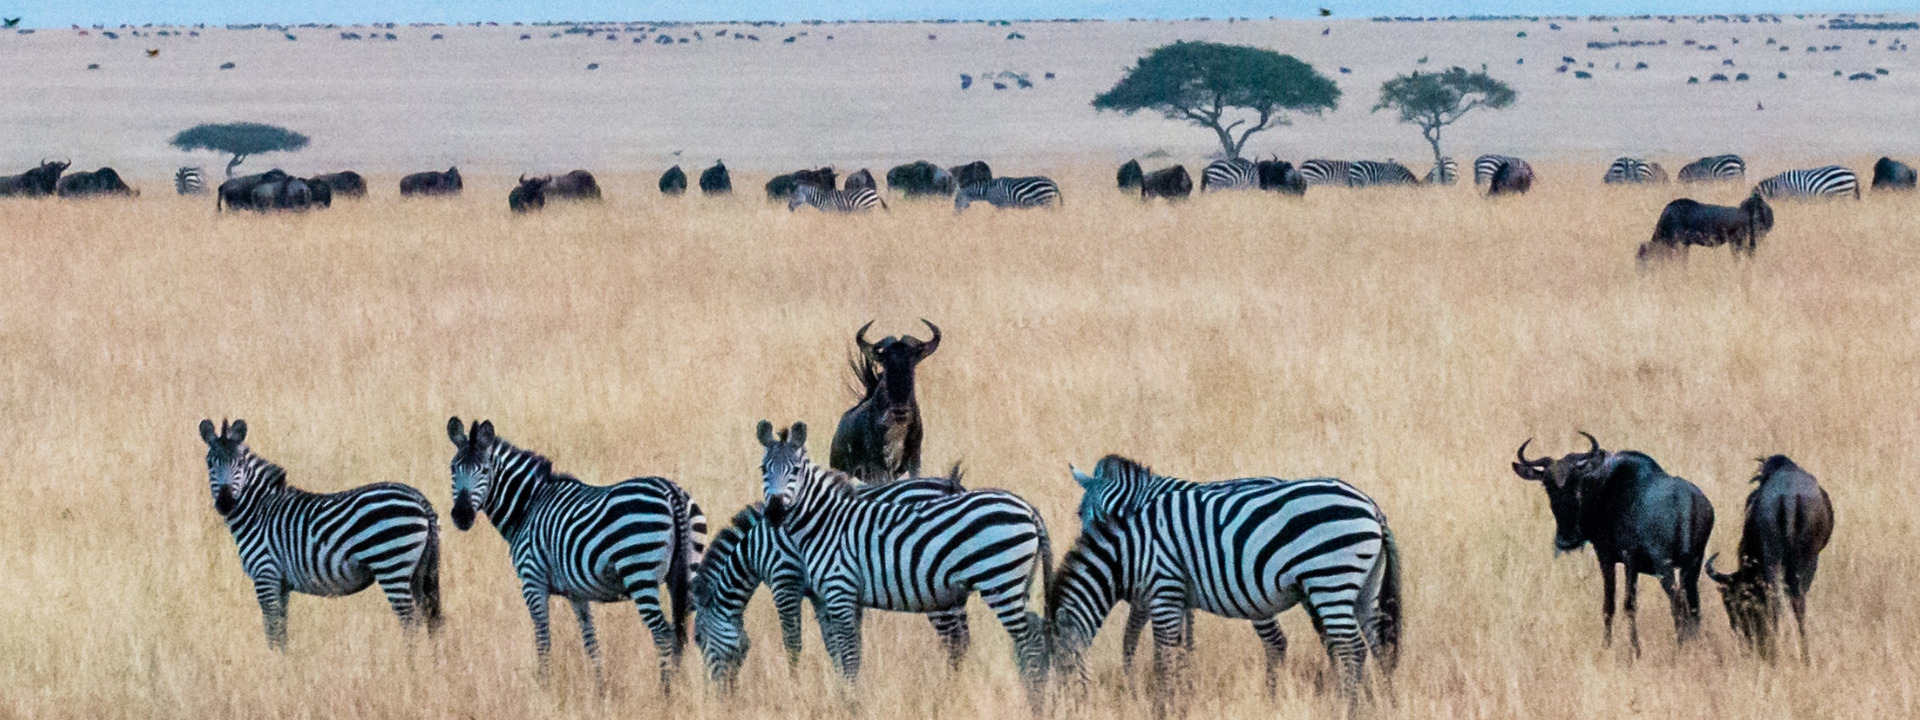 Human population growth squeezing out Serengeti wildlife, study shows -  Population Matters